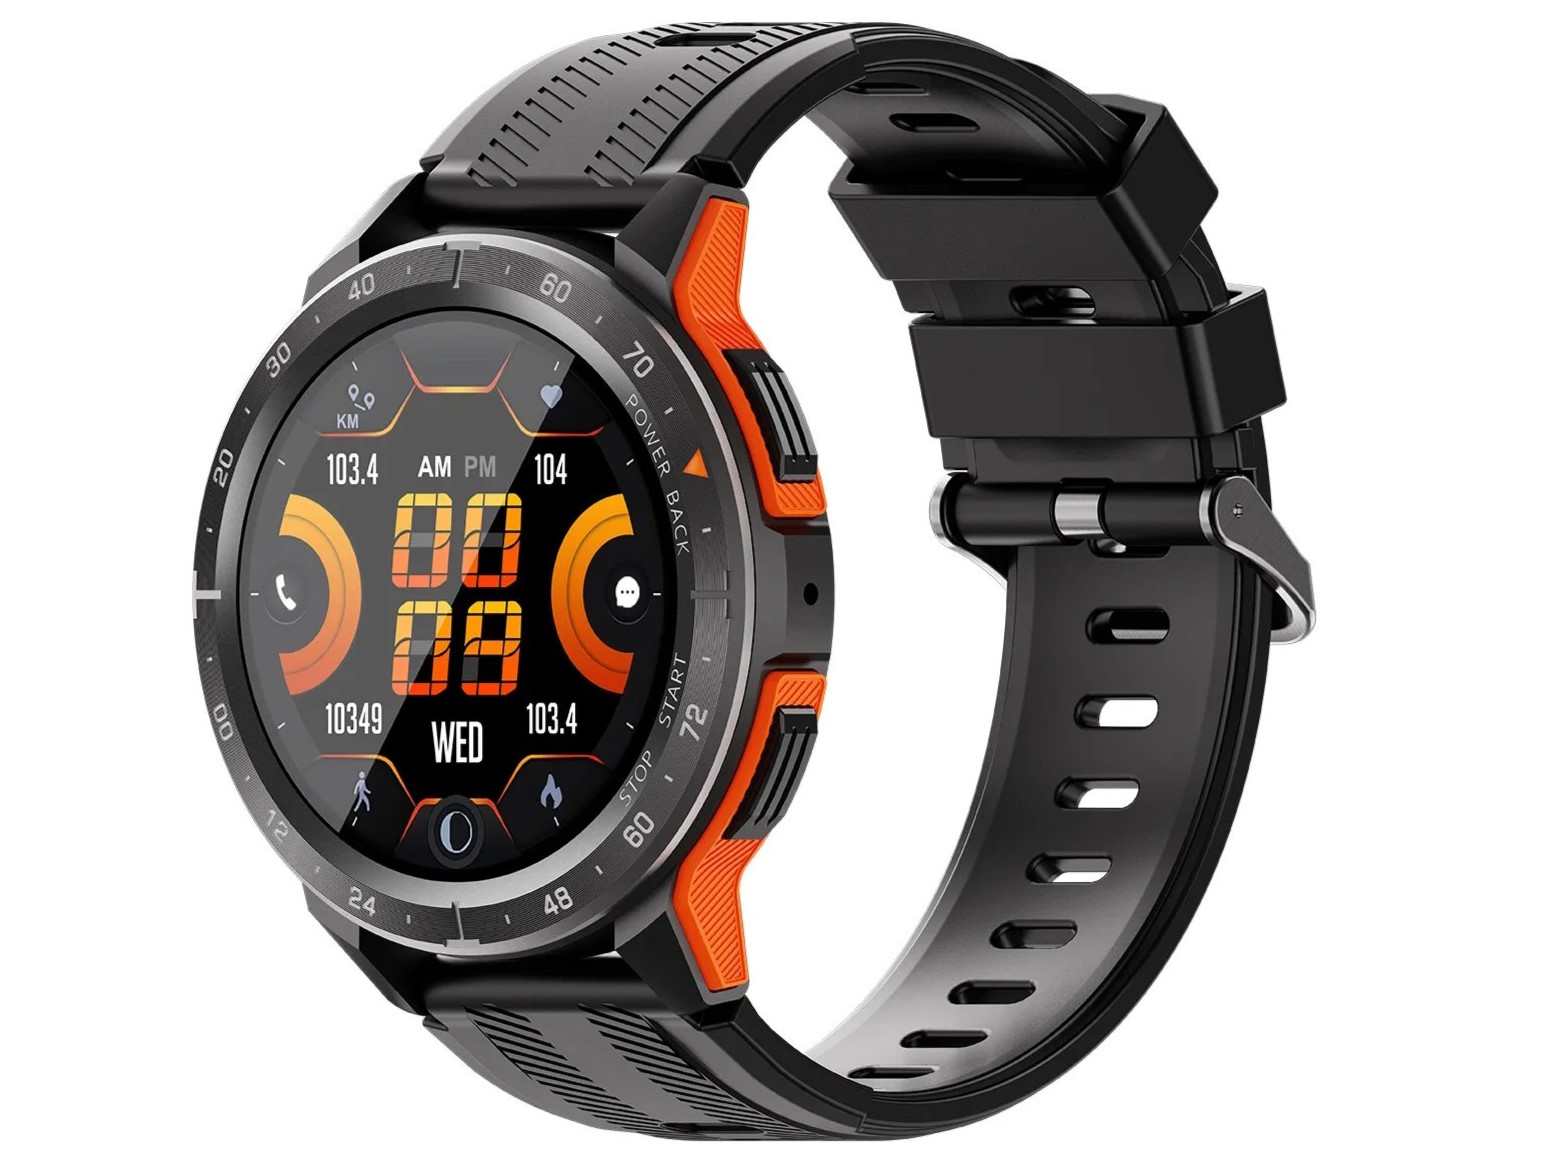 Fossibot W101: Very affordable AMOLED smartwatch that supposedly measures blood pressure and offers telephony features